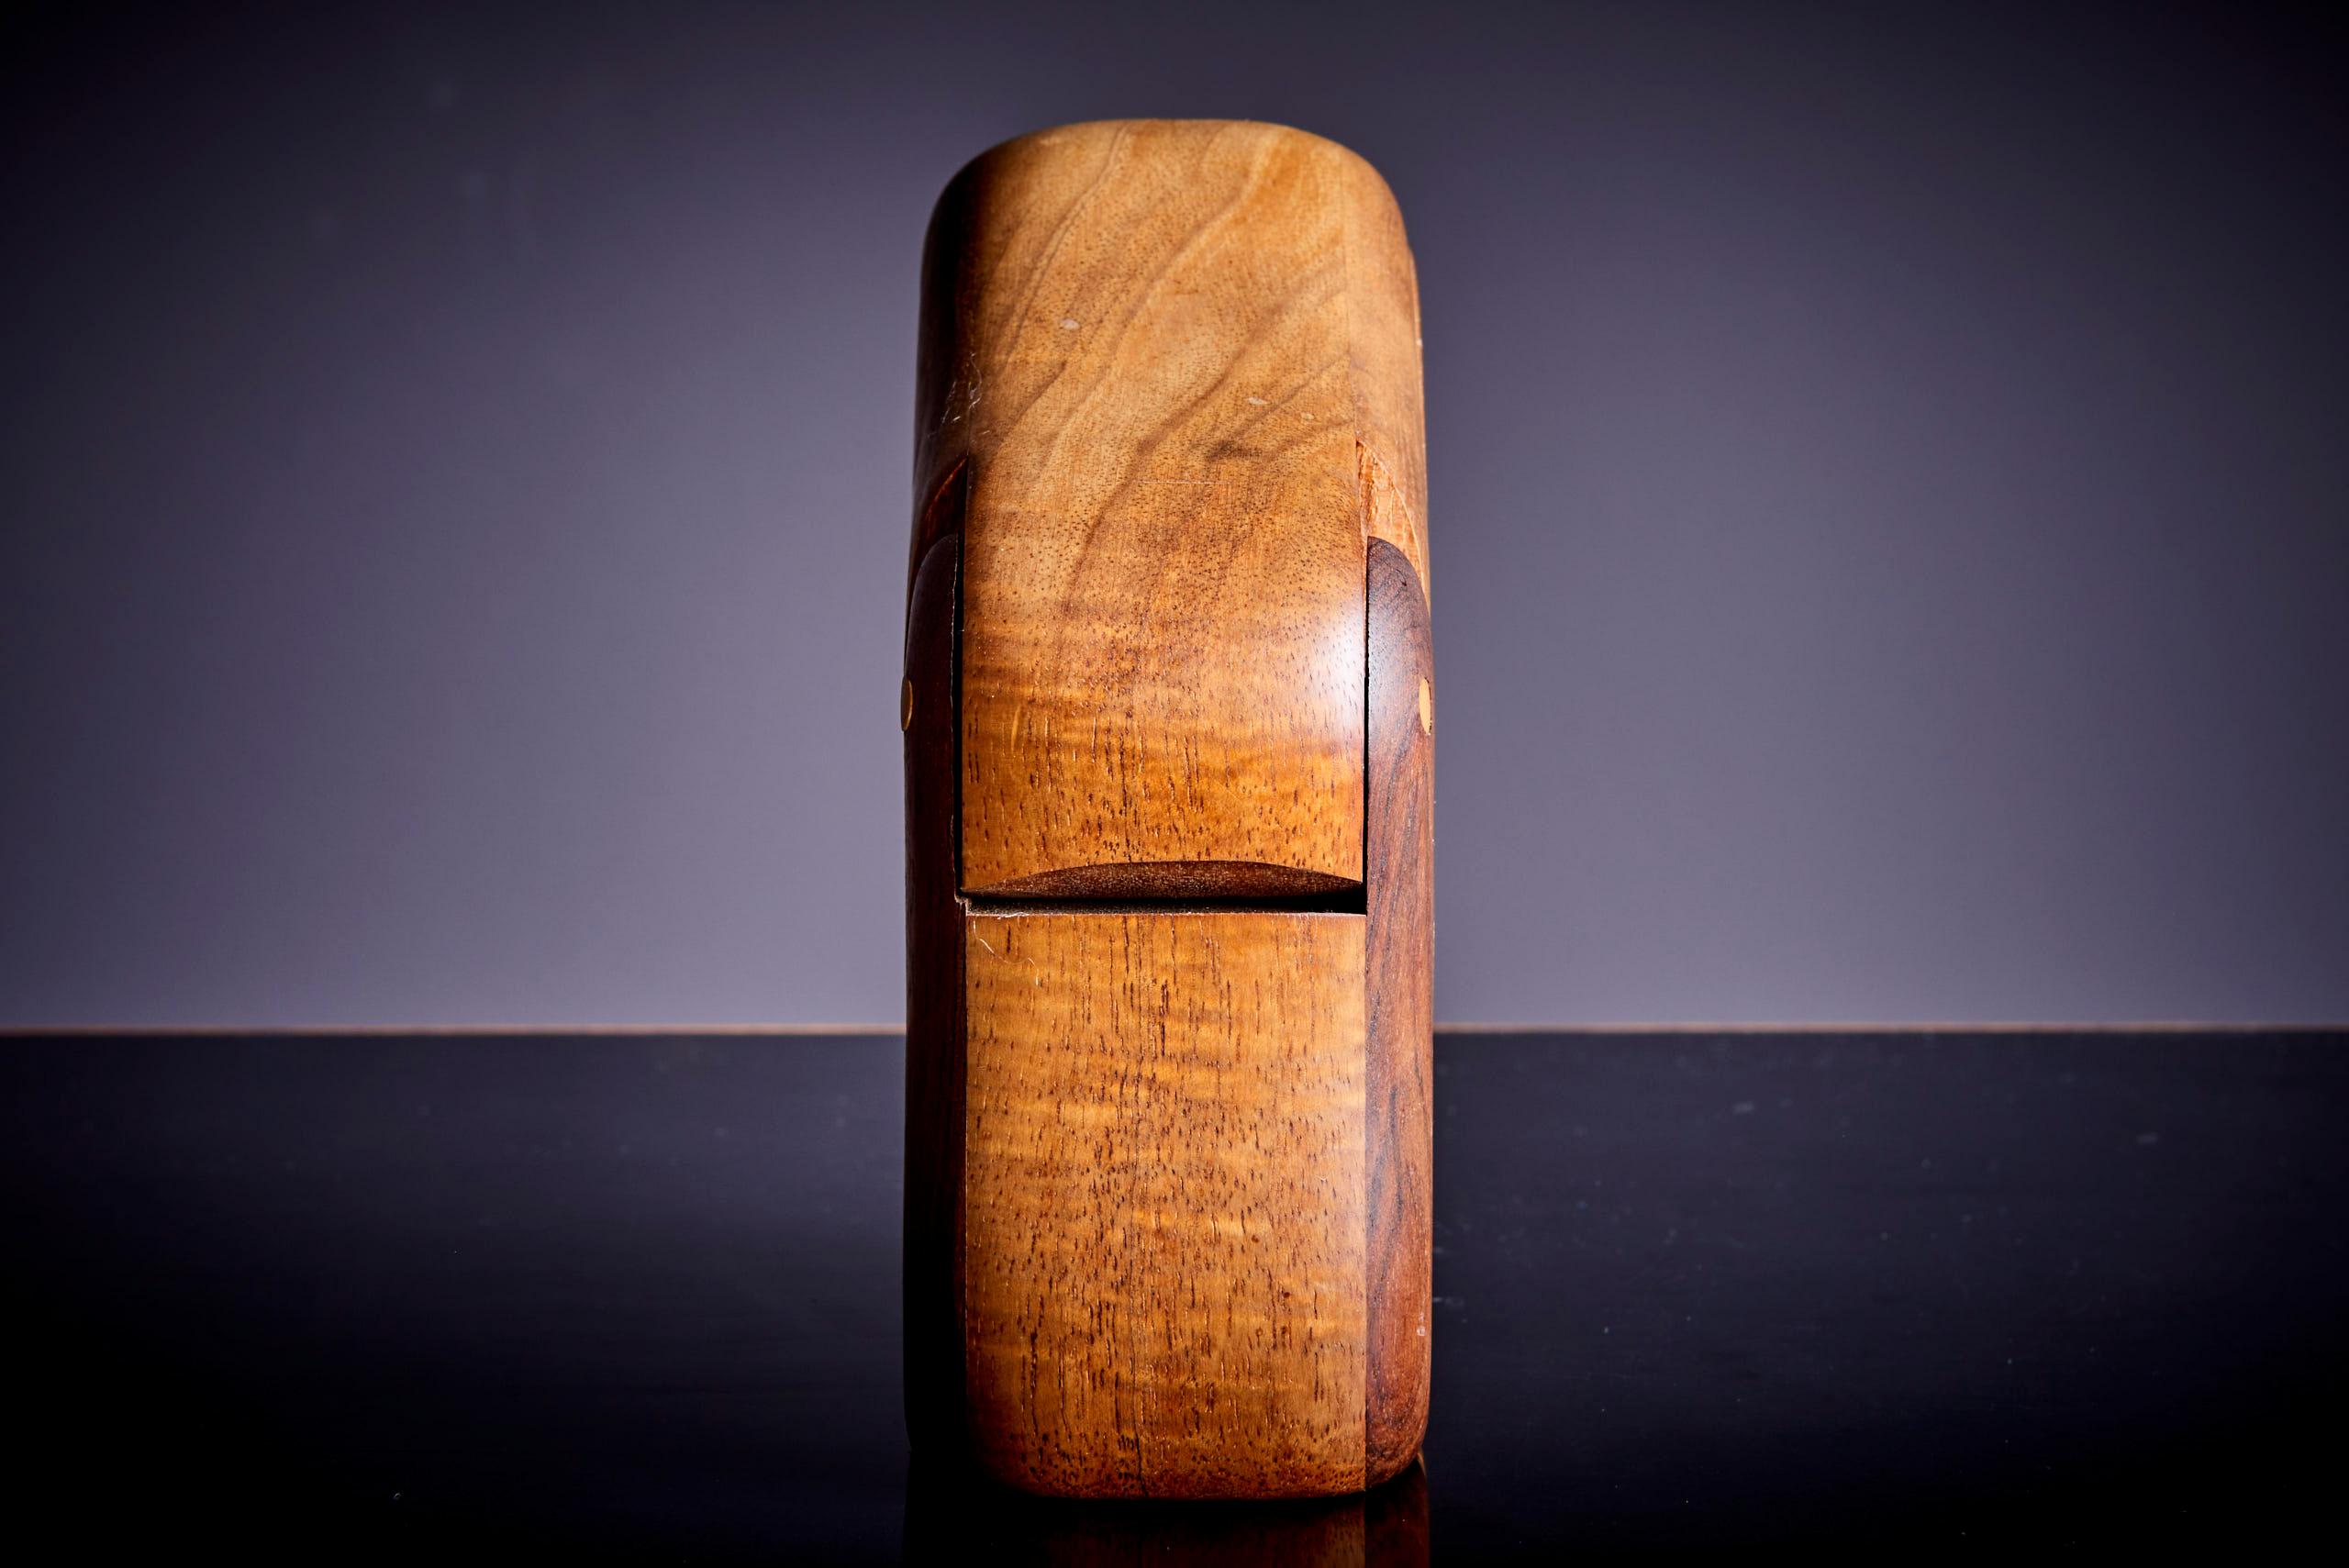 Absolute high end studio box by Charles B. Cobb. Made in American walnut.
A fantastic piece of American studio craft.

